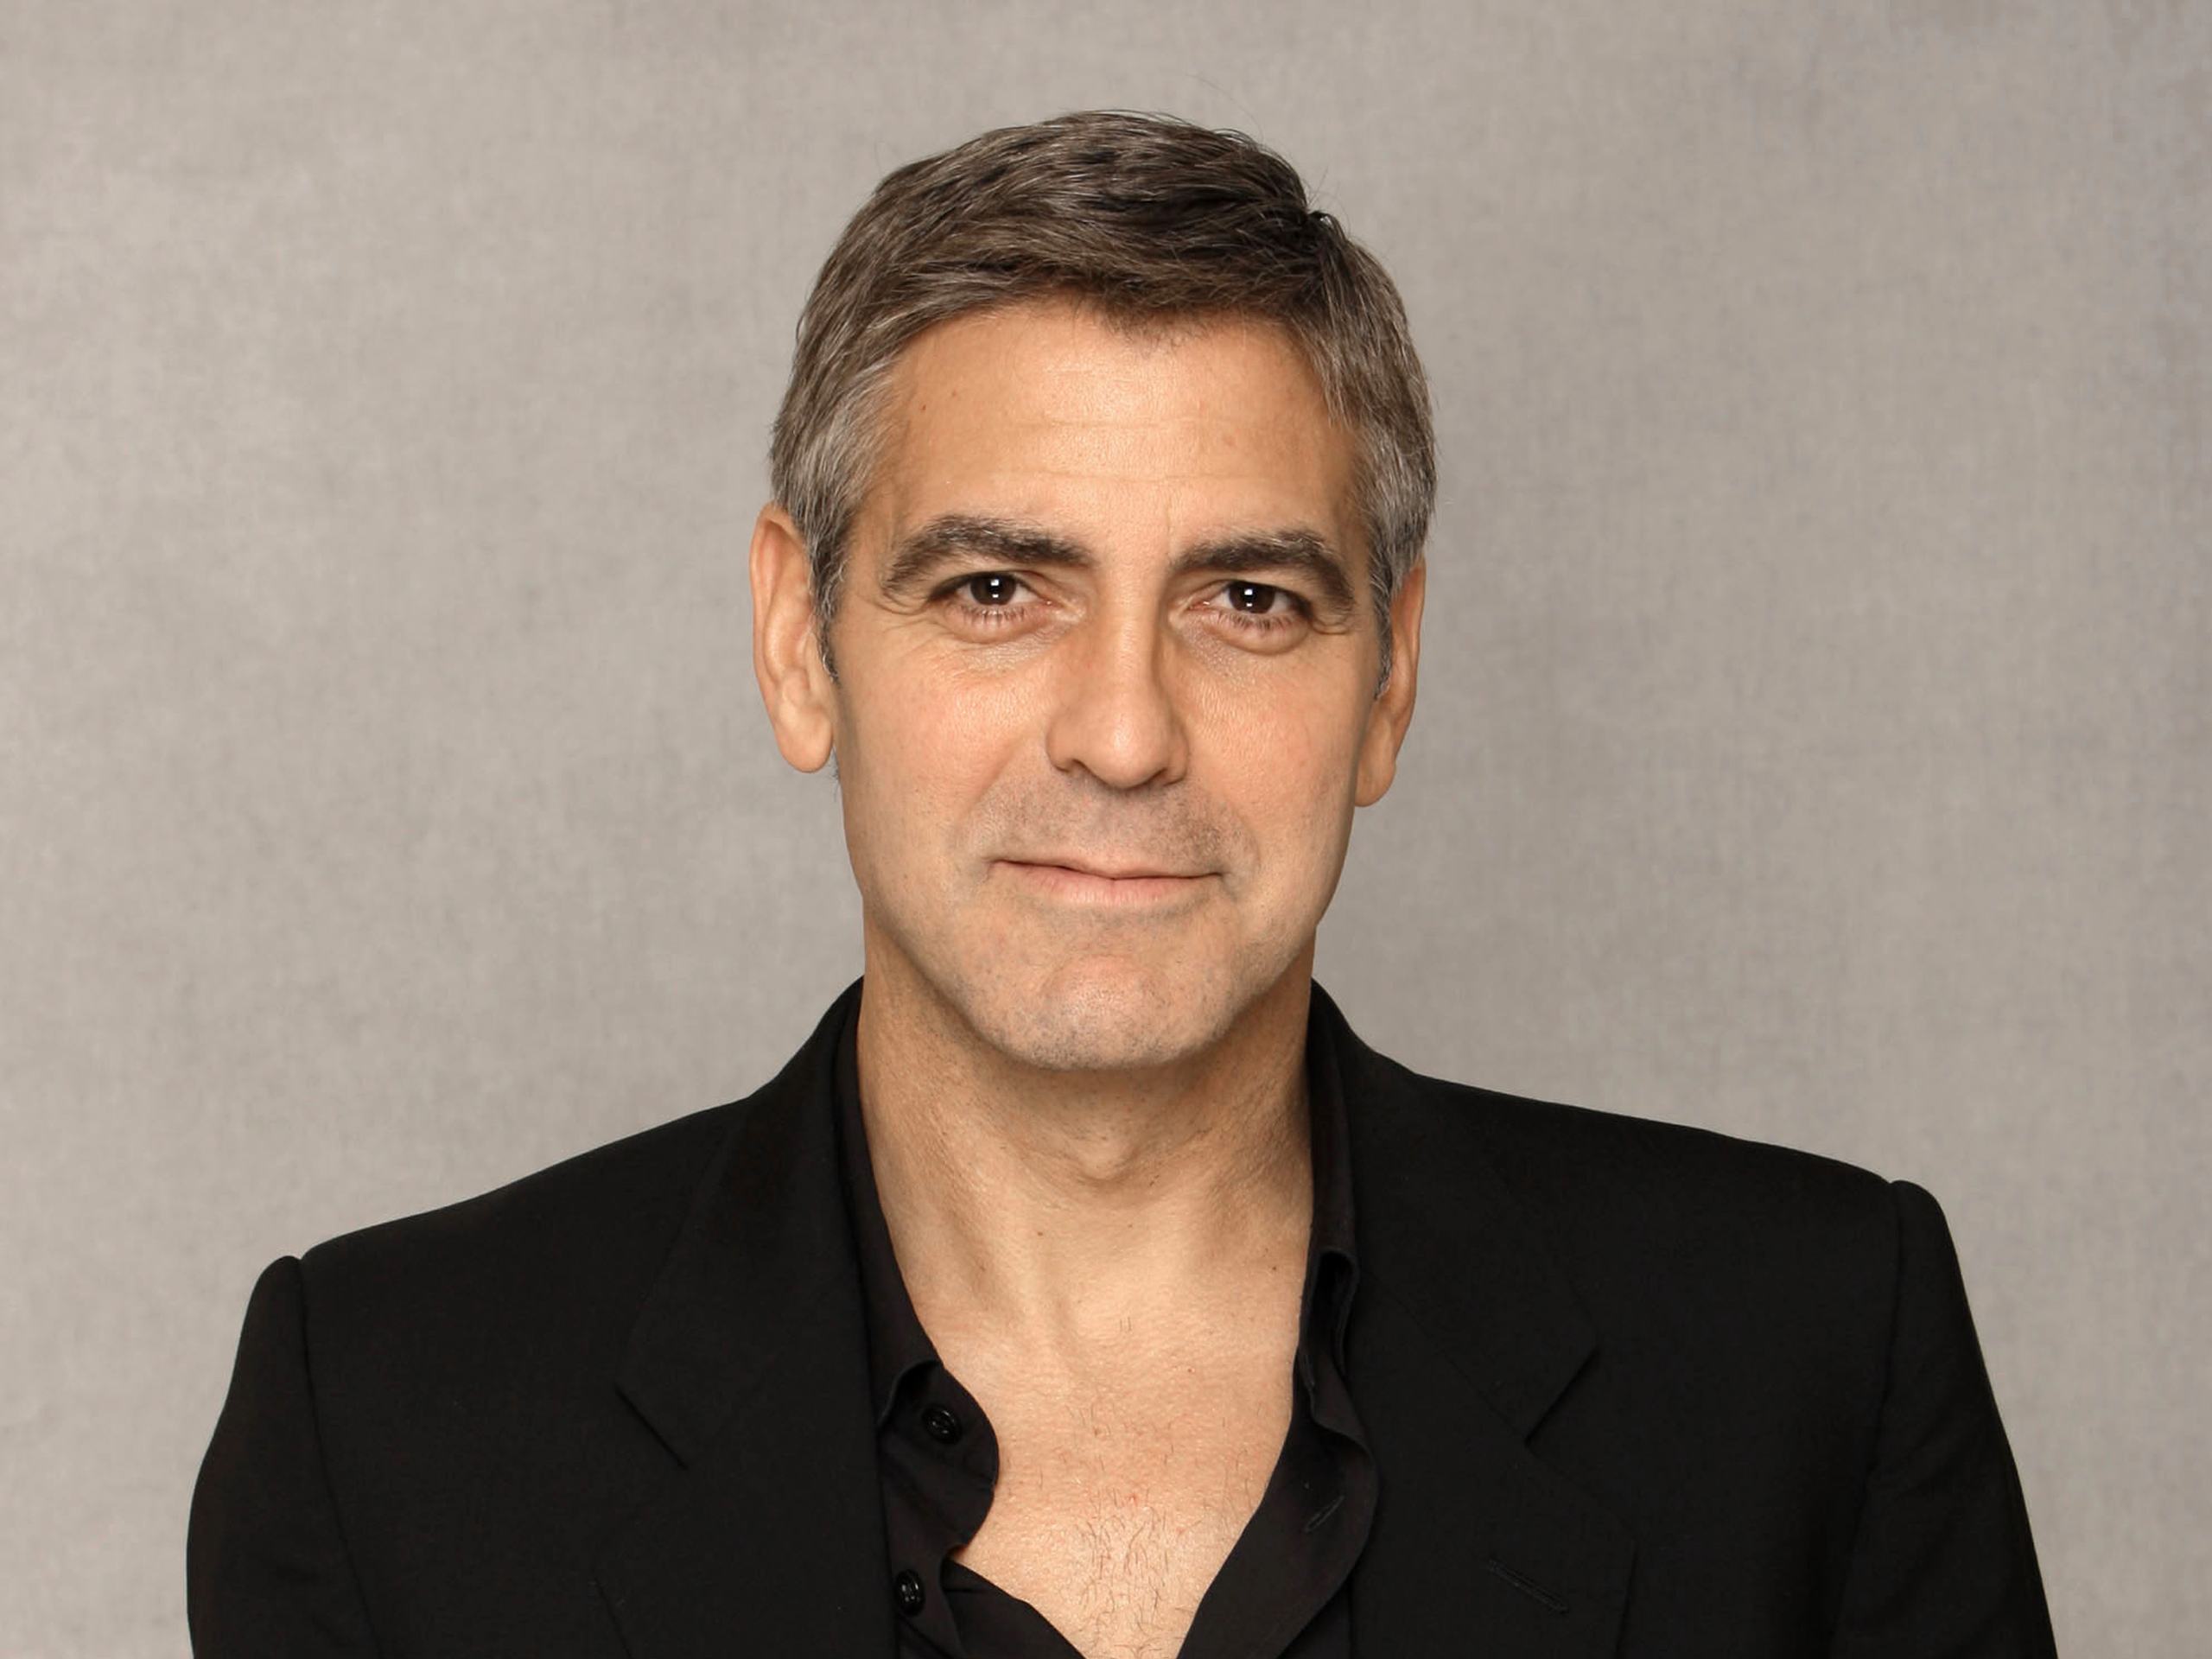 Actor George Clooney poses for a photograph in Beverly Hills Calif., Monday, Feb. 4, 2008. (AP Photo/Kevork Djansezian)